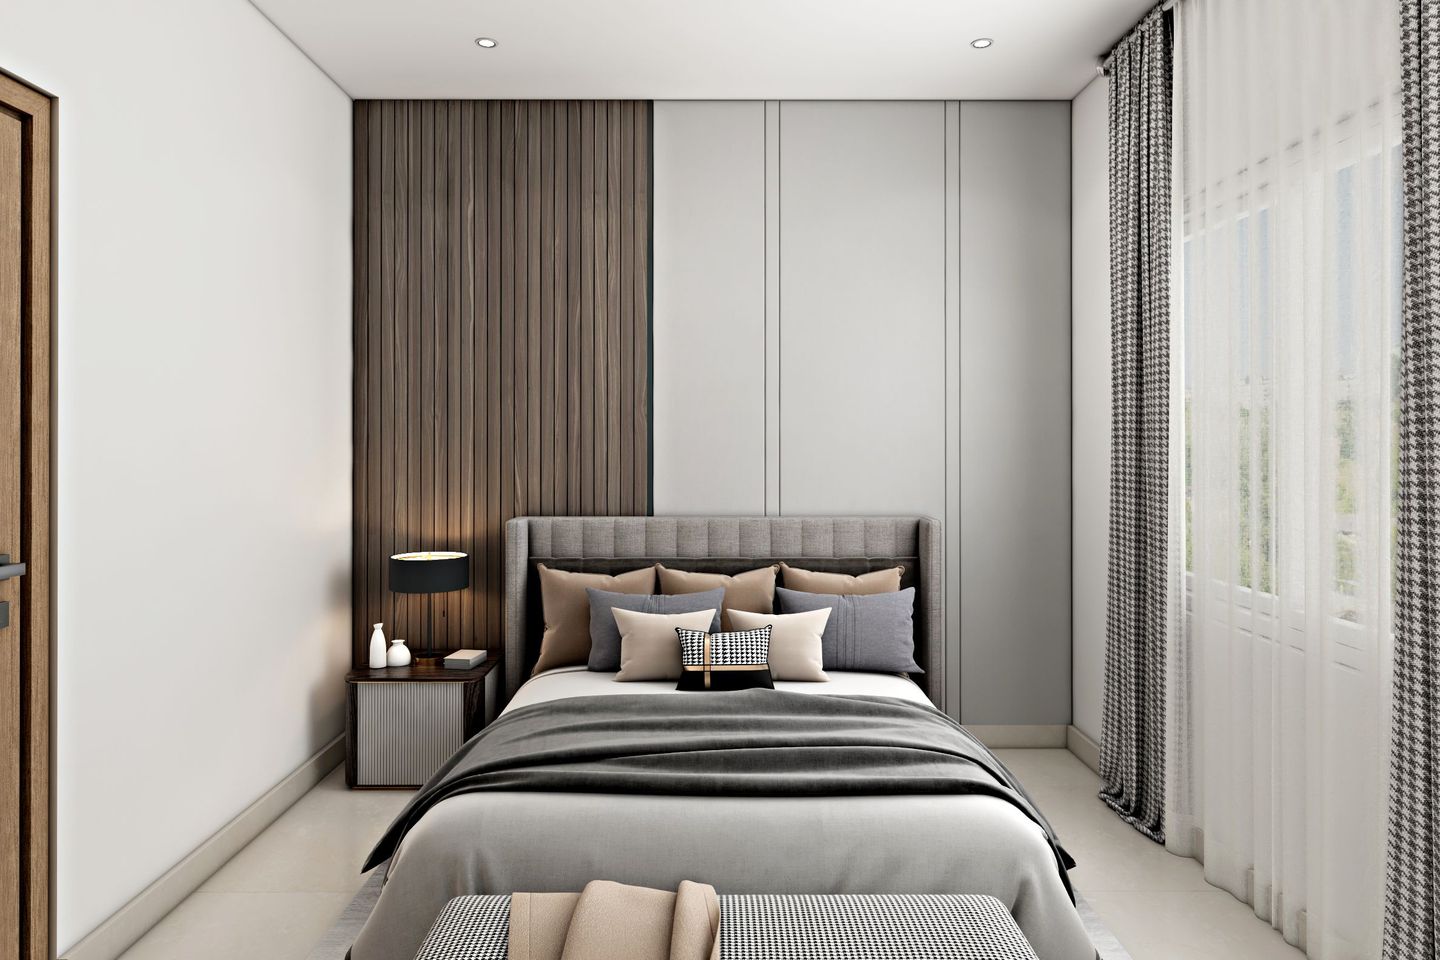 Bedroom Design With Wooden Wall Panels - Livspace